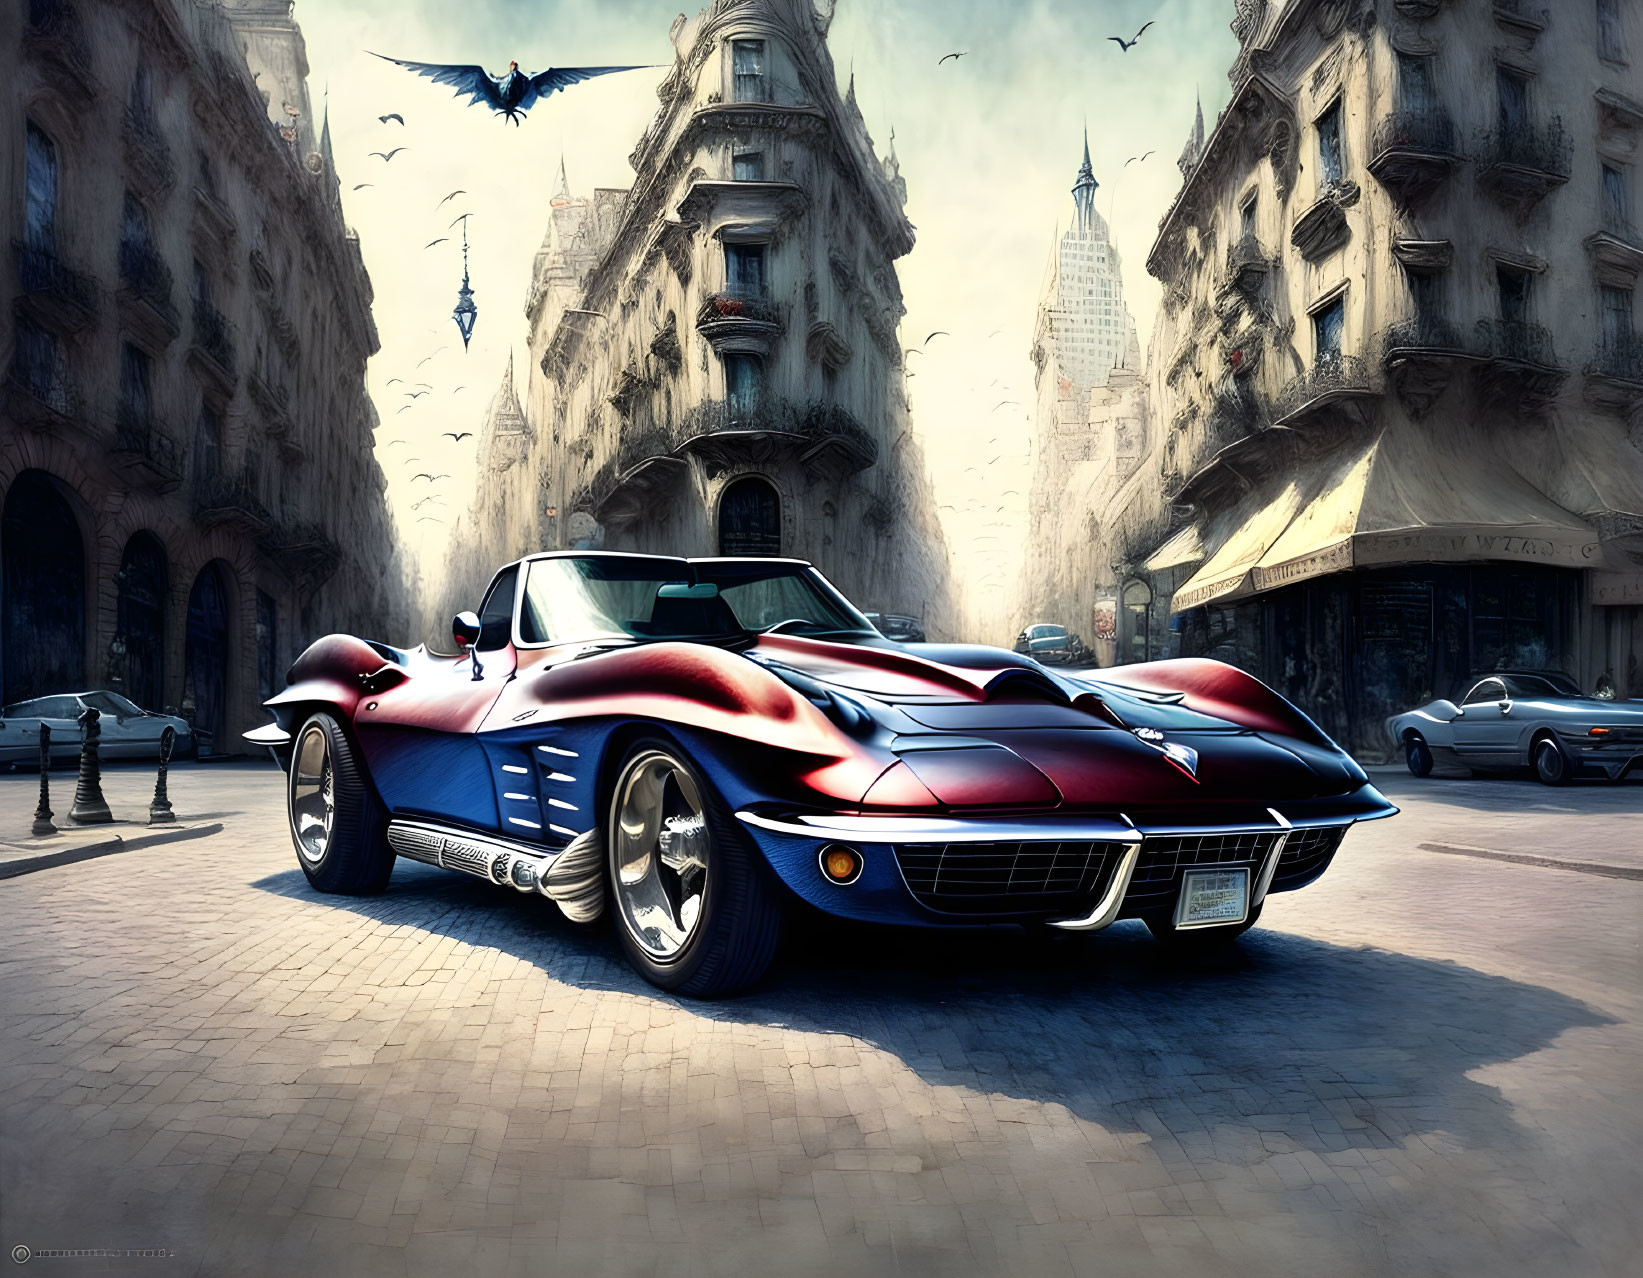 Vintage Blue Corvette with Red Stripes on City Street with Aged Buildings and Birds in Sky